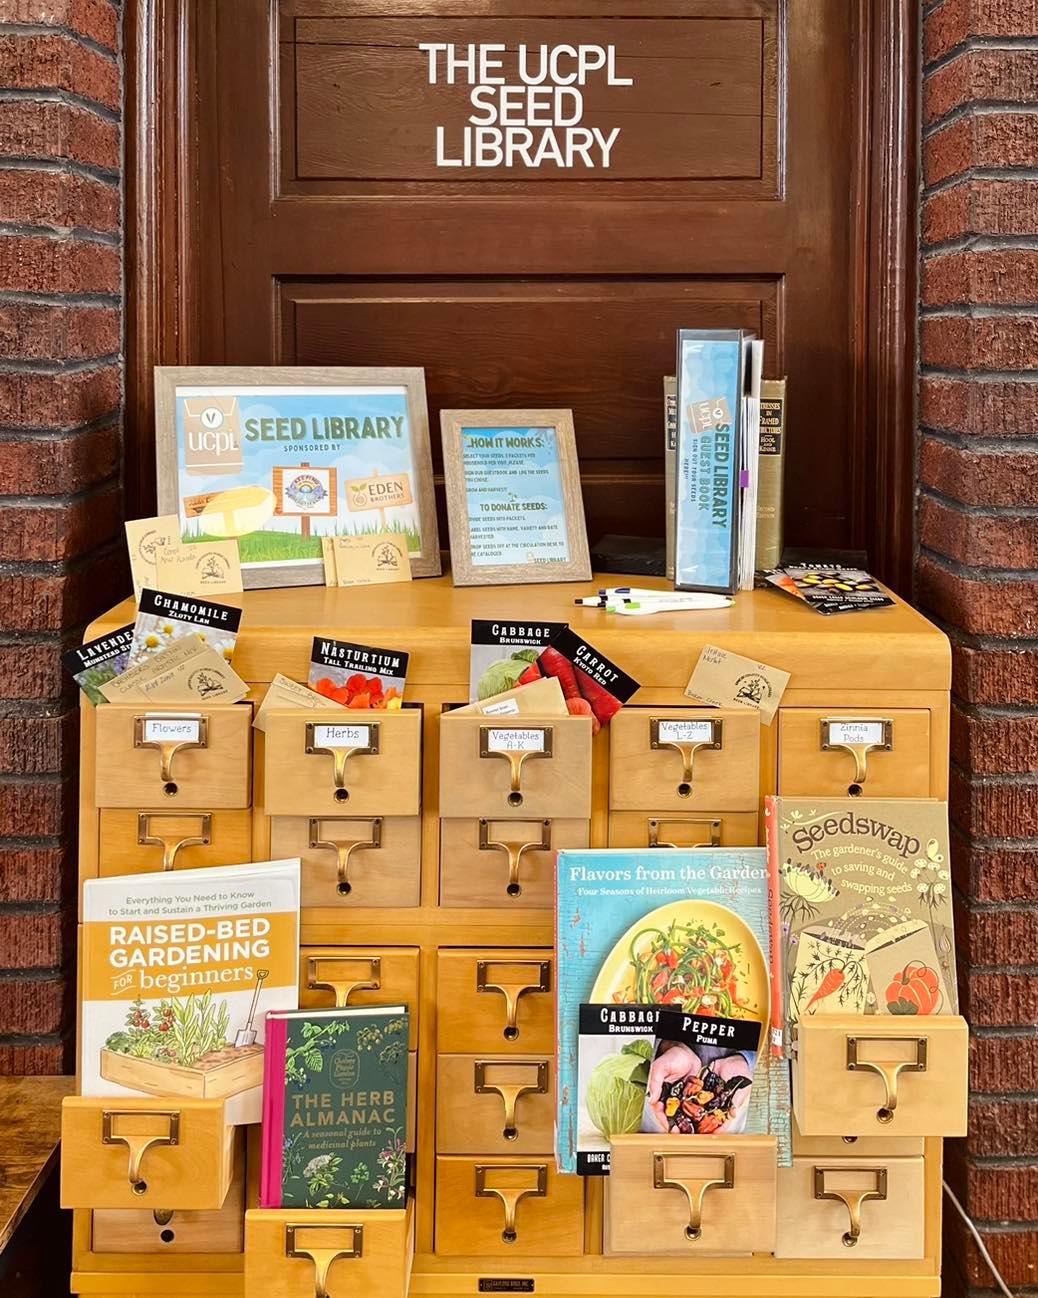 The seed library at Unicoi County Public Library offers patrons packages from Baker Creek and Eden Brothers, as well as locally collected seeds. (Courtesy of Suzy Bomgardner)